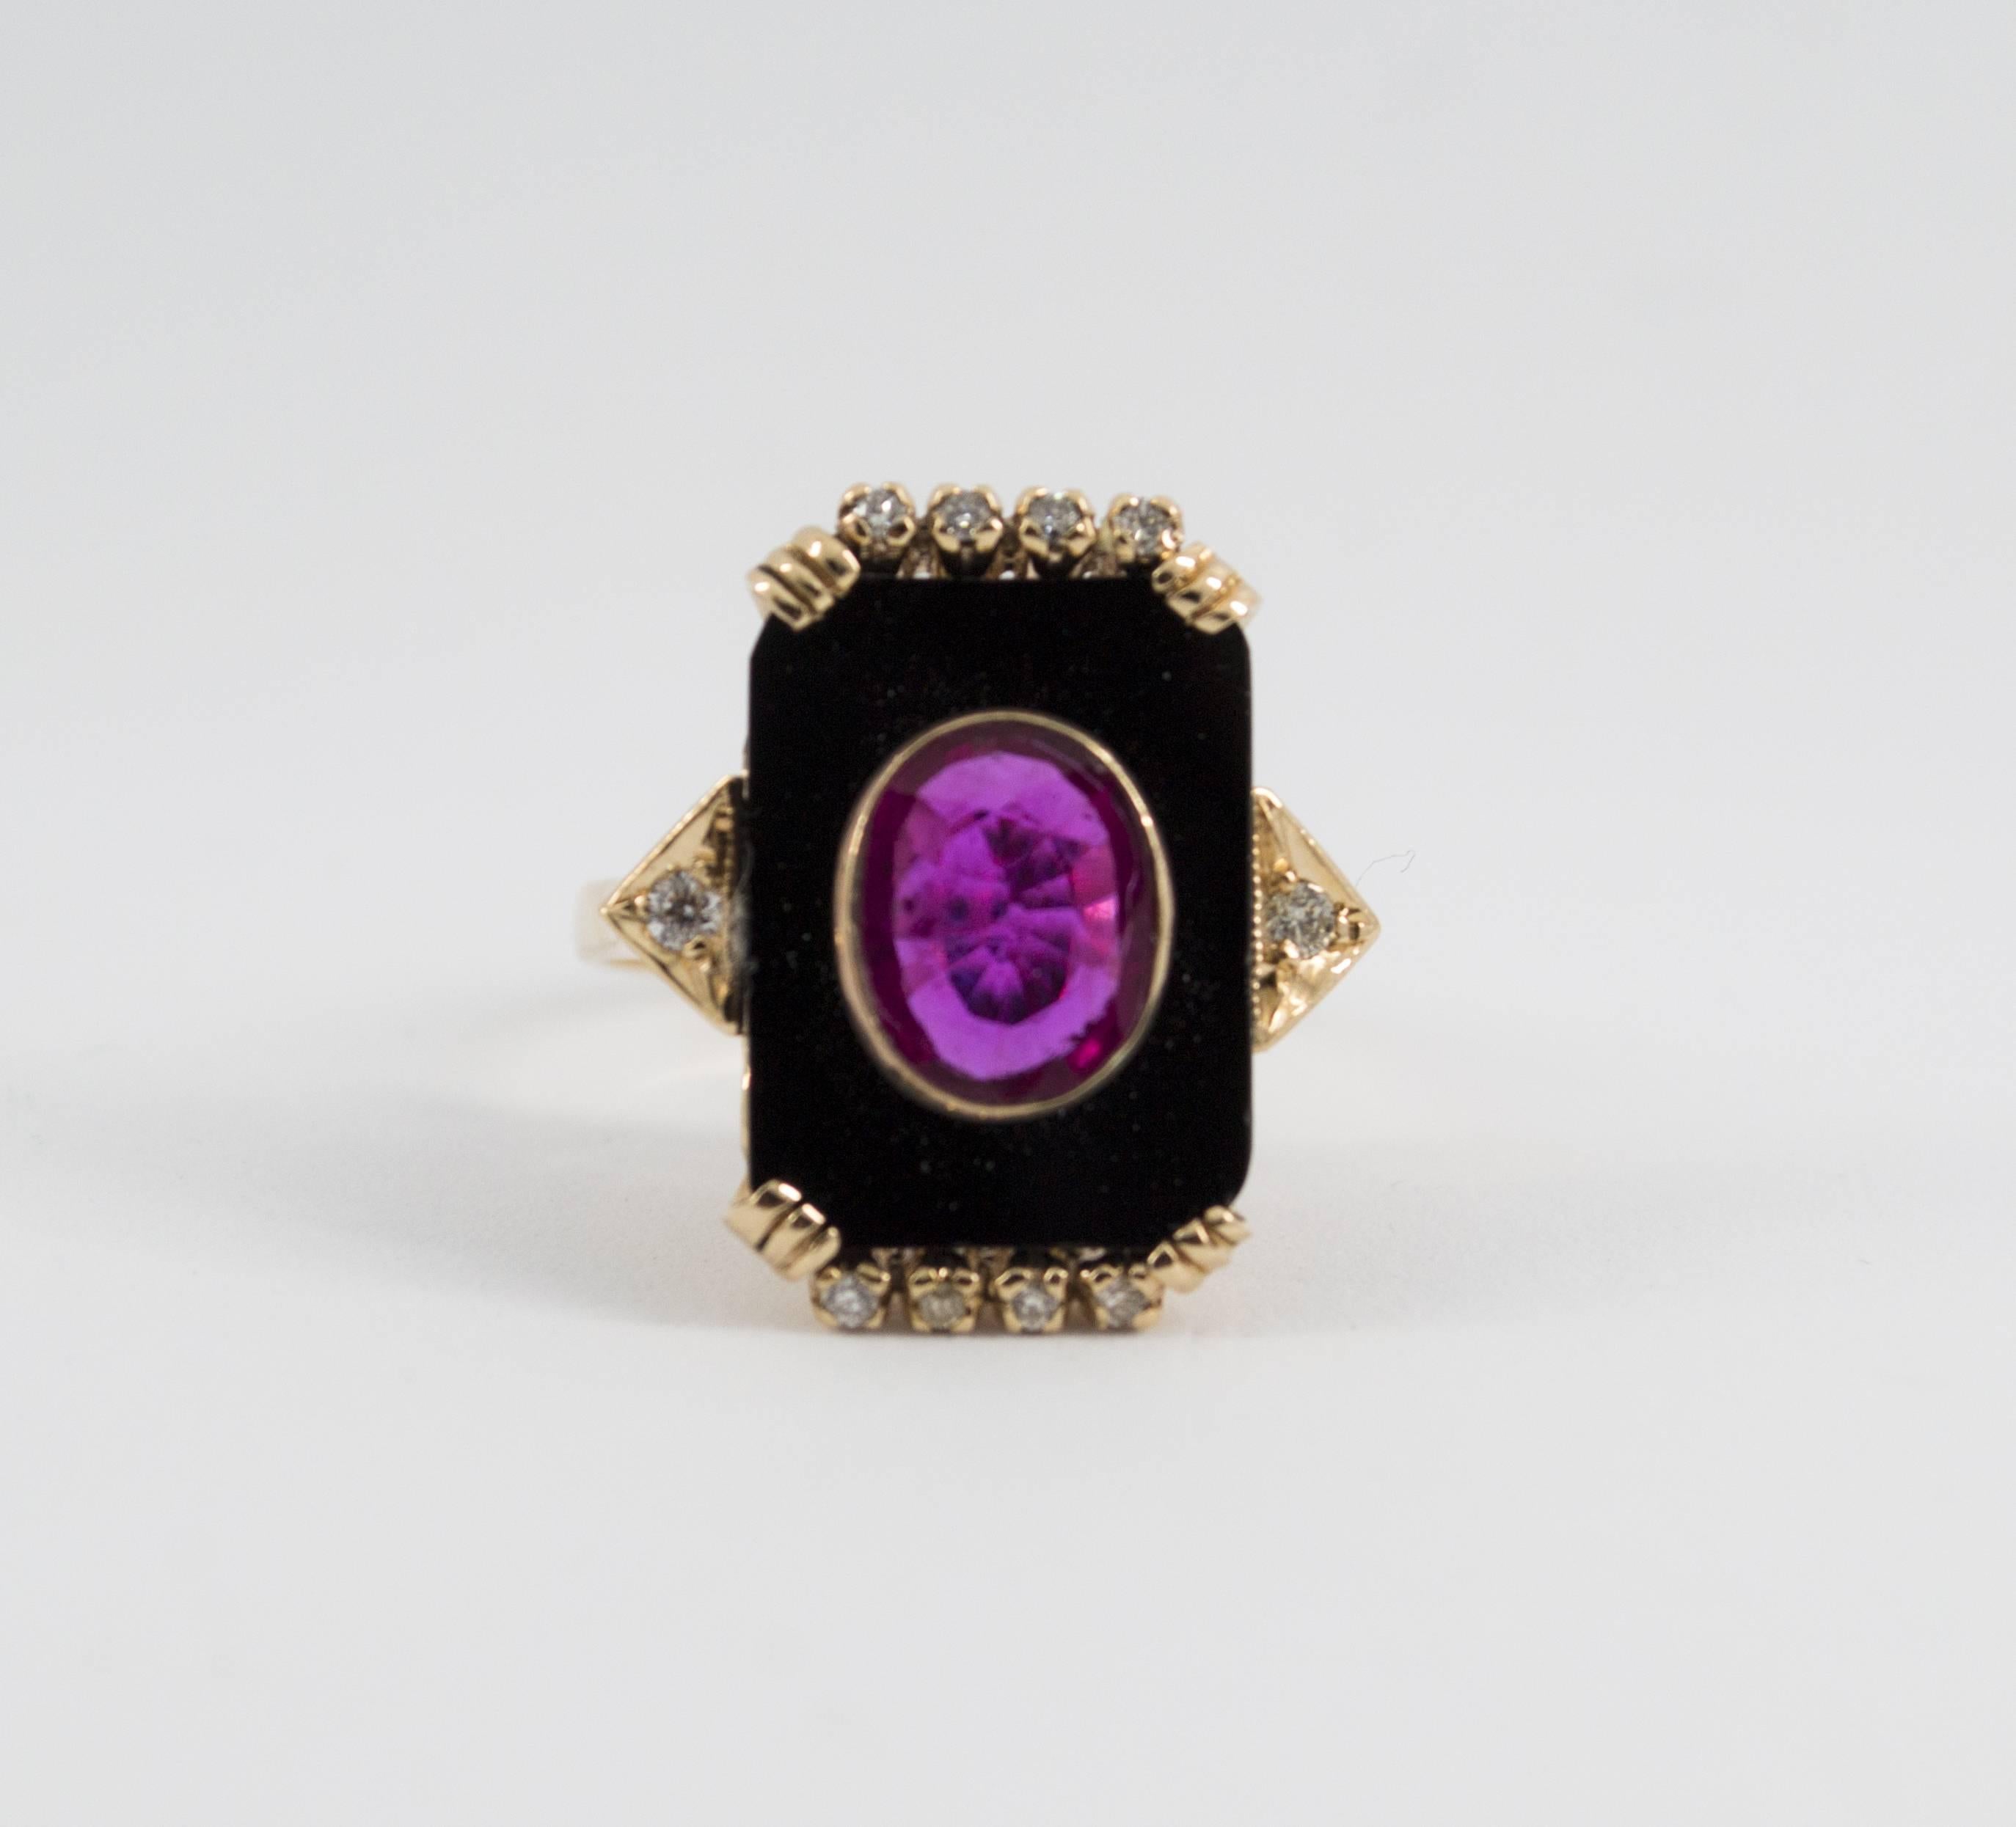 This Ring is made of 14K Yellow Gold.
This Ring has 0.16 Carats of Diamonds.
This Ring has a 1.98 Carats Ruby.
This Ring has also Onyx.
Size ITA: 16 USA: 7 1/2
We're a workshop so every piece is handmade, customizable and resizable.